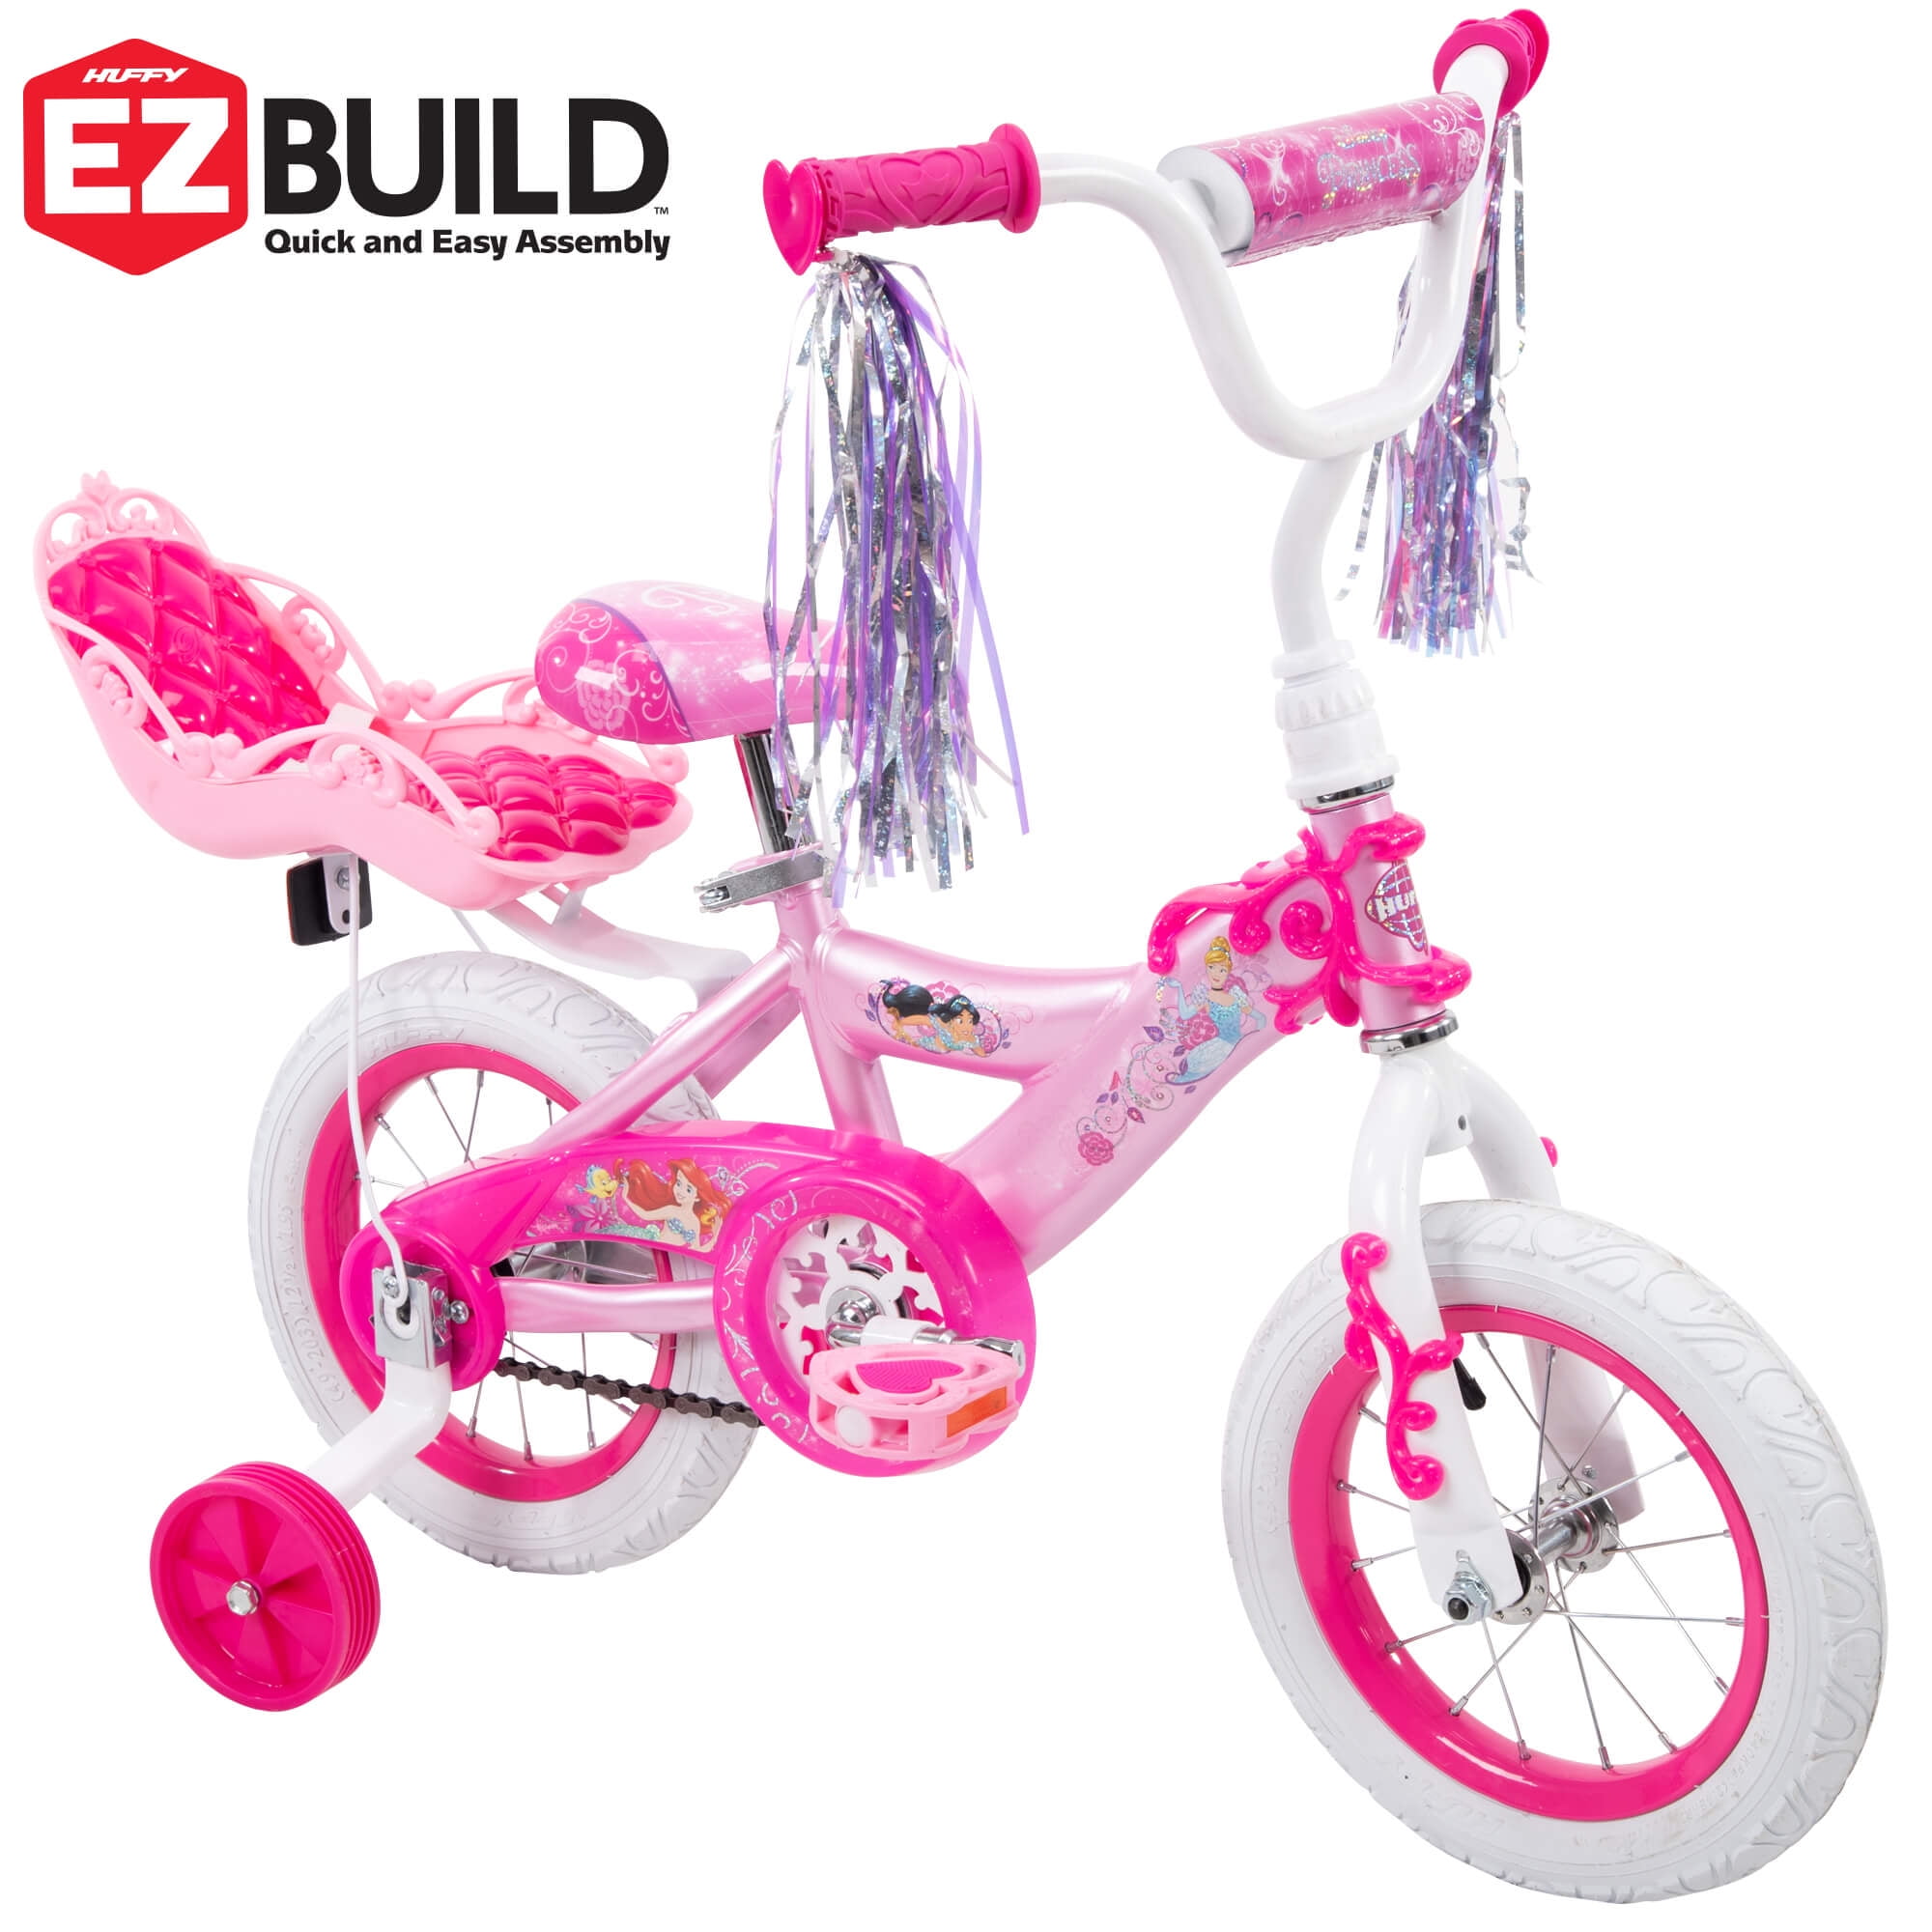 Bike For Girls 12 Bicycle Minnie Mouse Huffy Training Wheels Doll Carrier Pink 